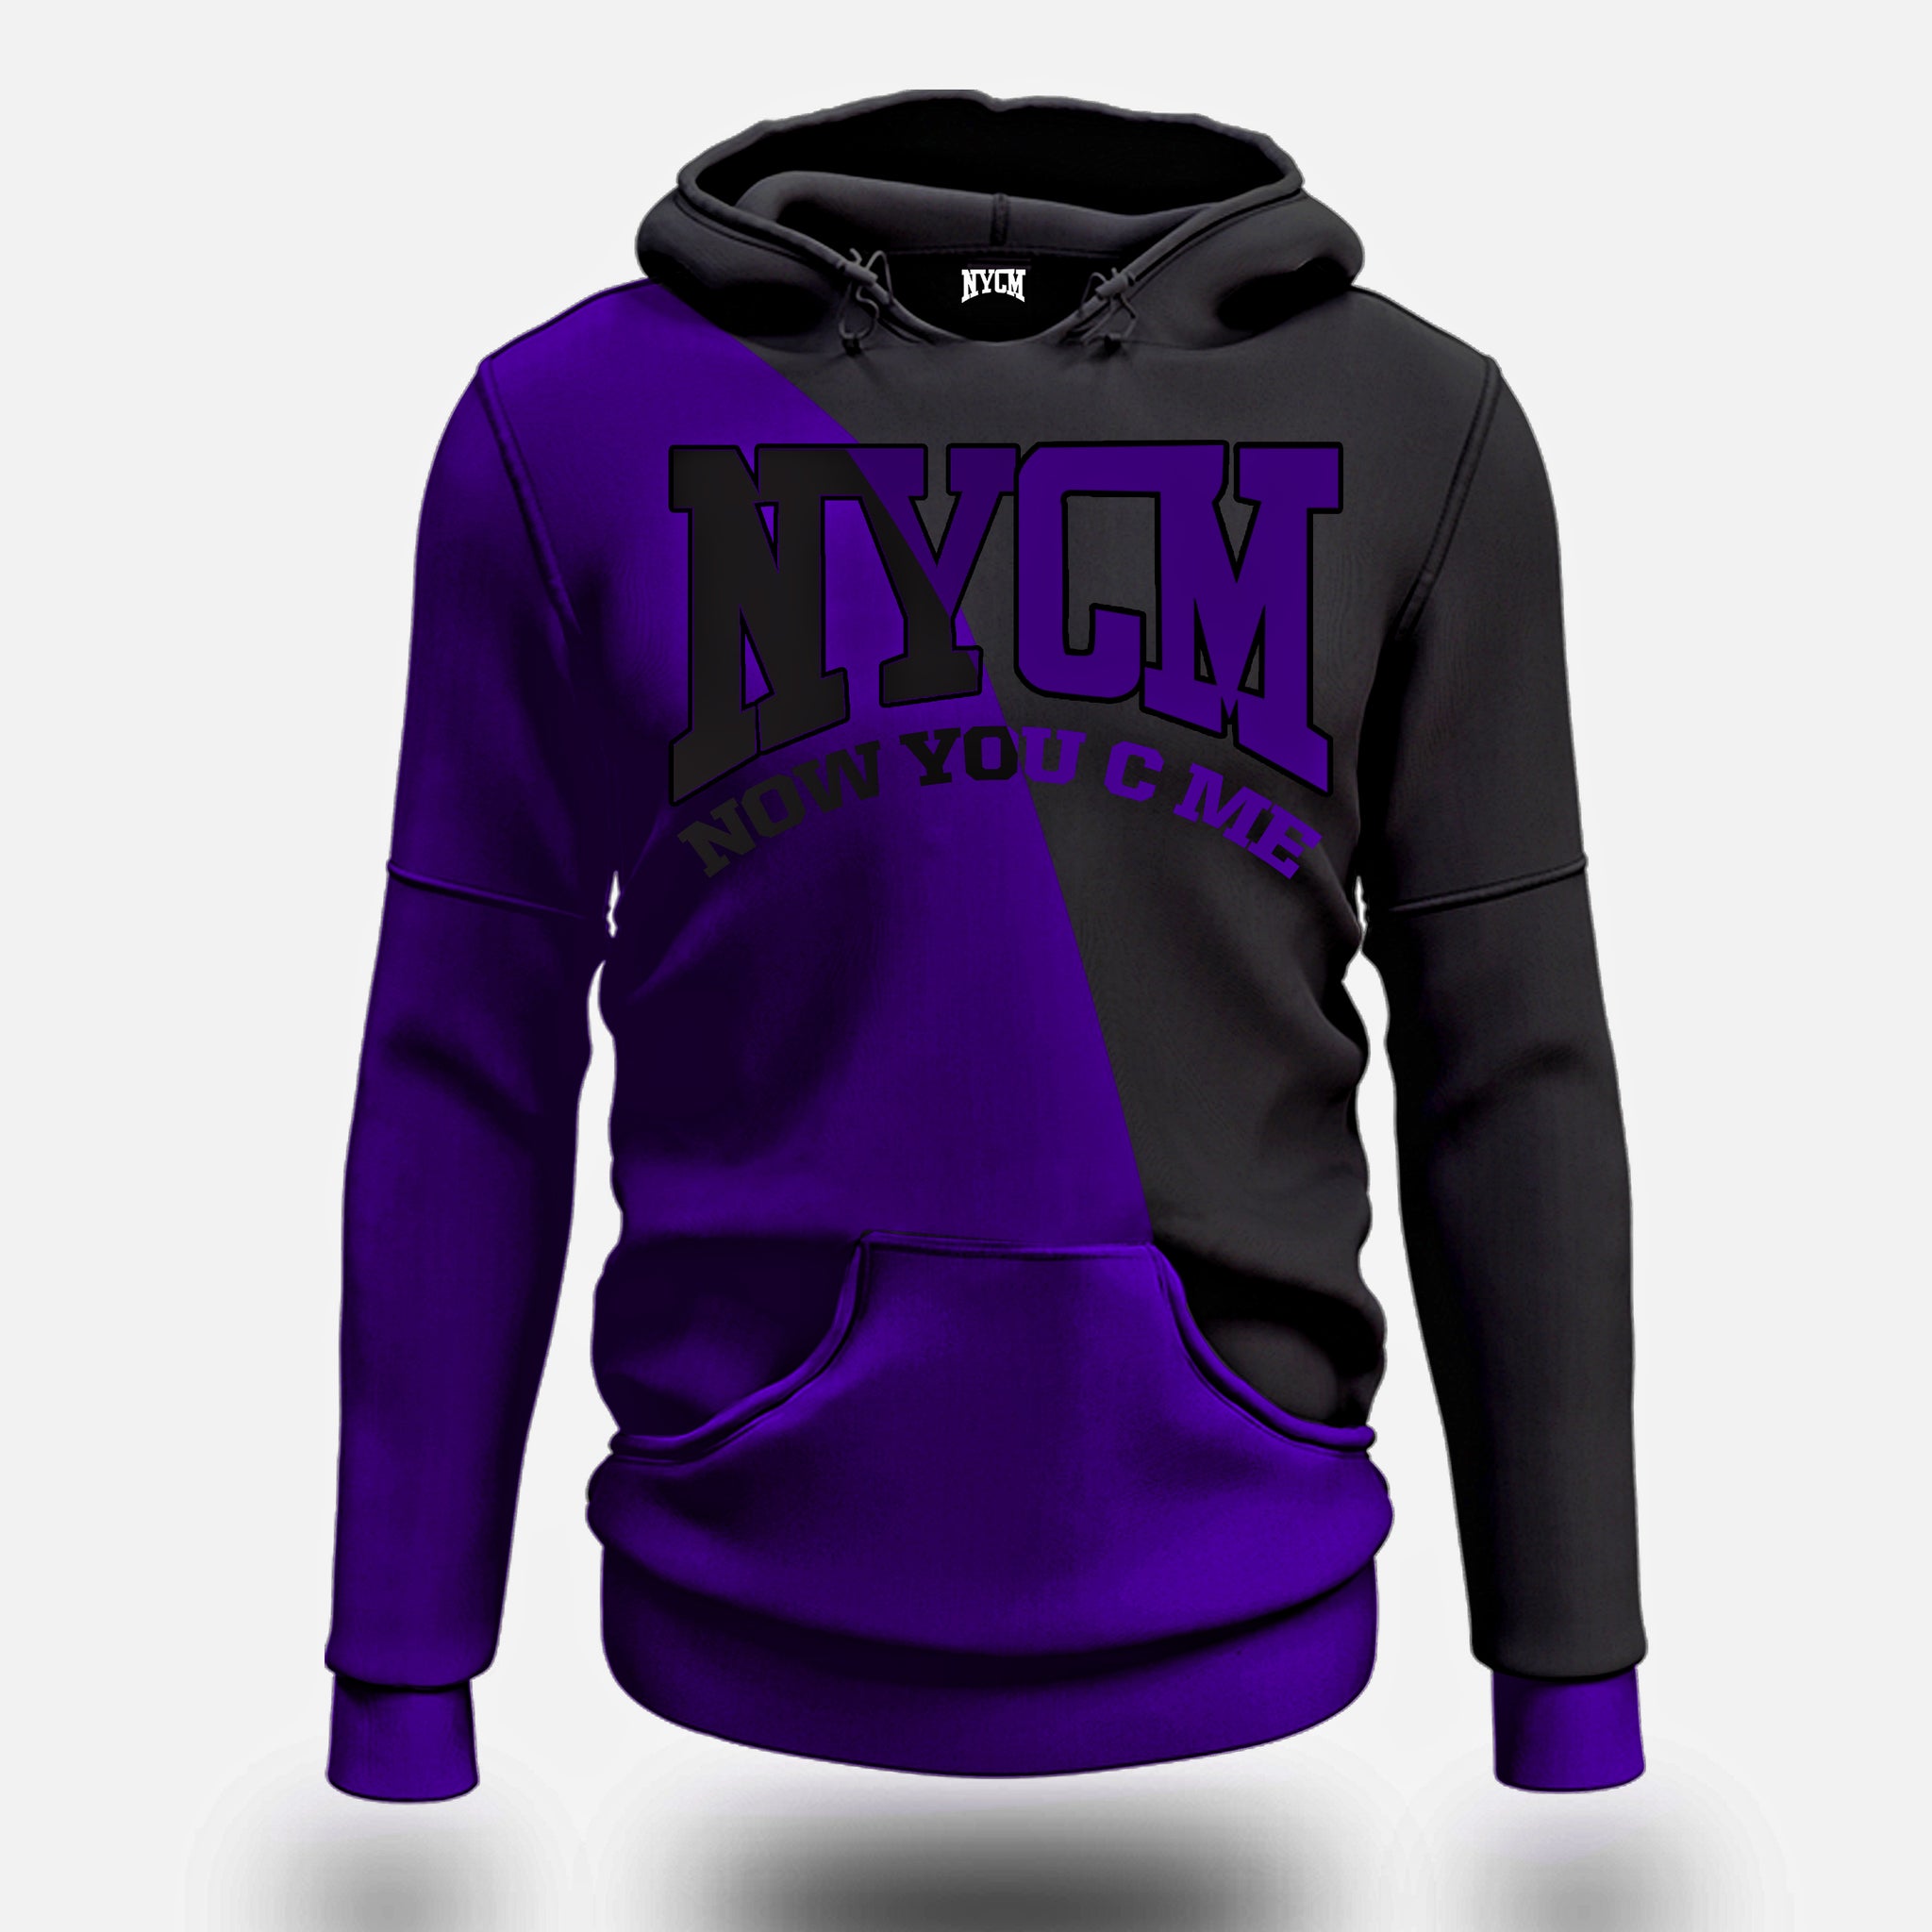 "BOLD NYCM" EMBROIDERED HOODIE (BLACK / PURPLE)